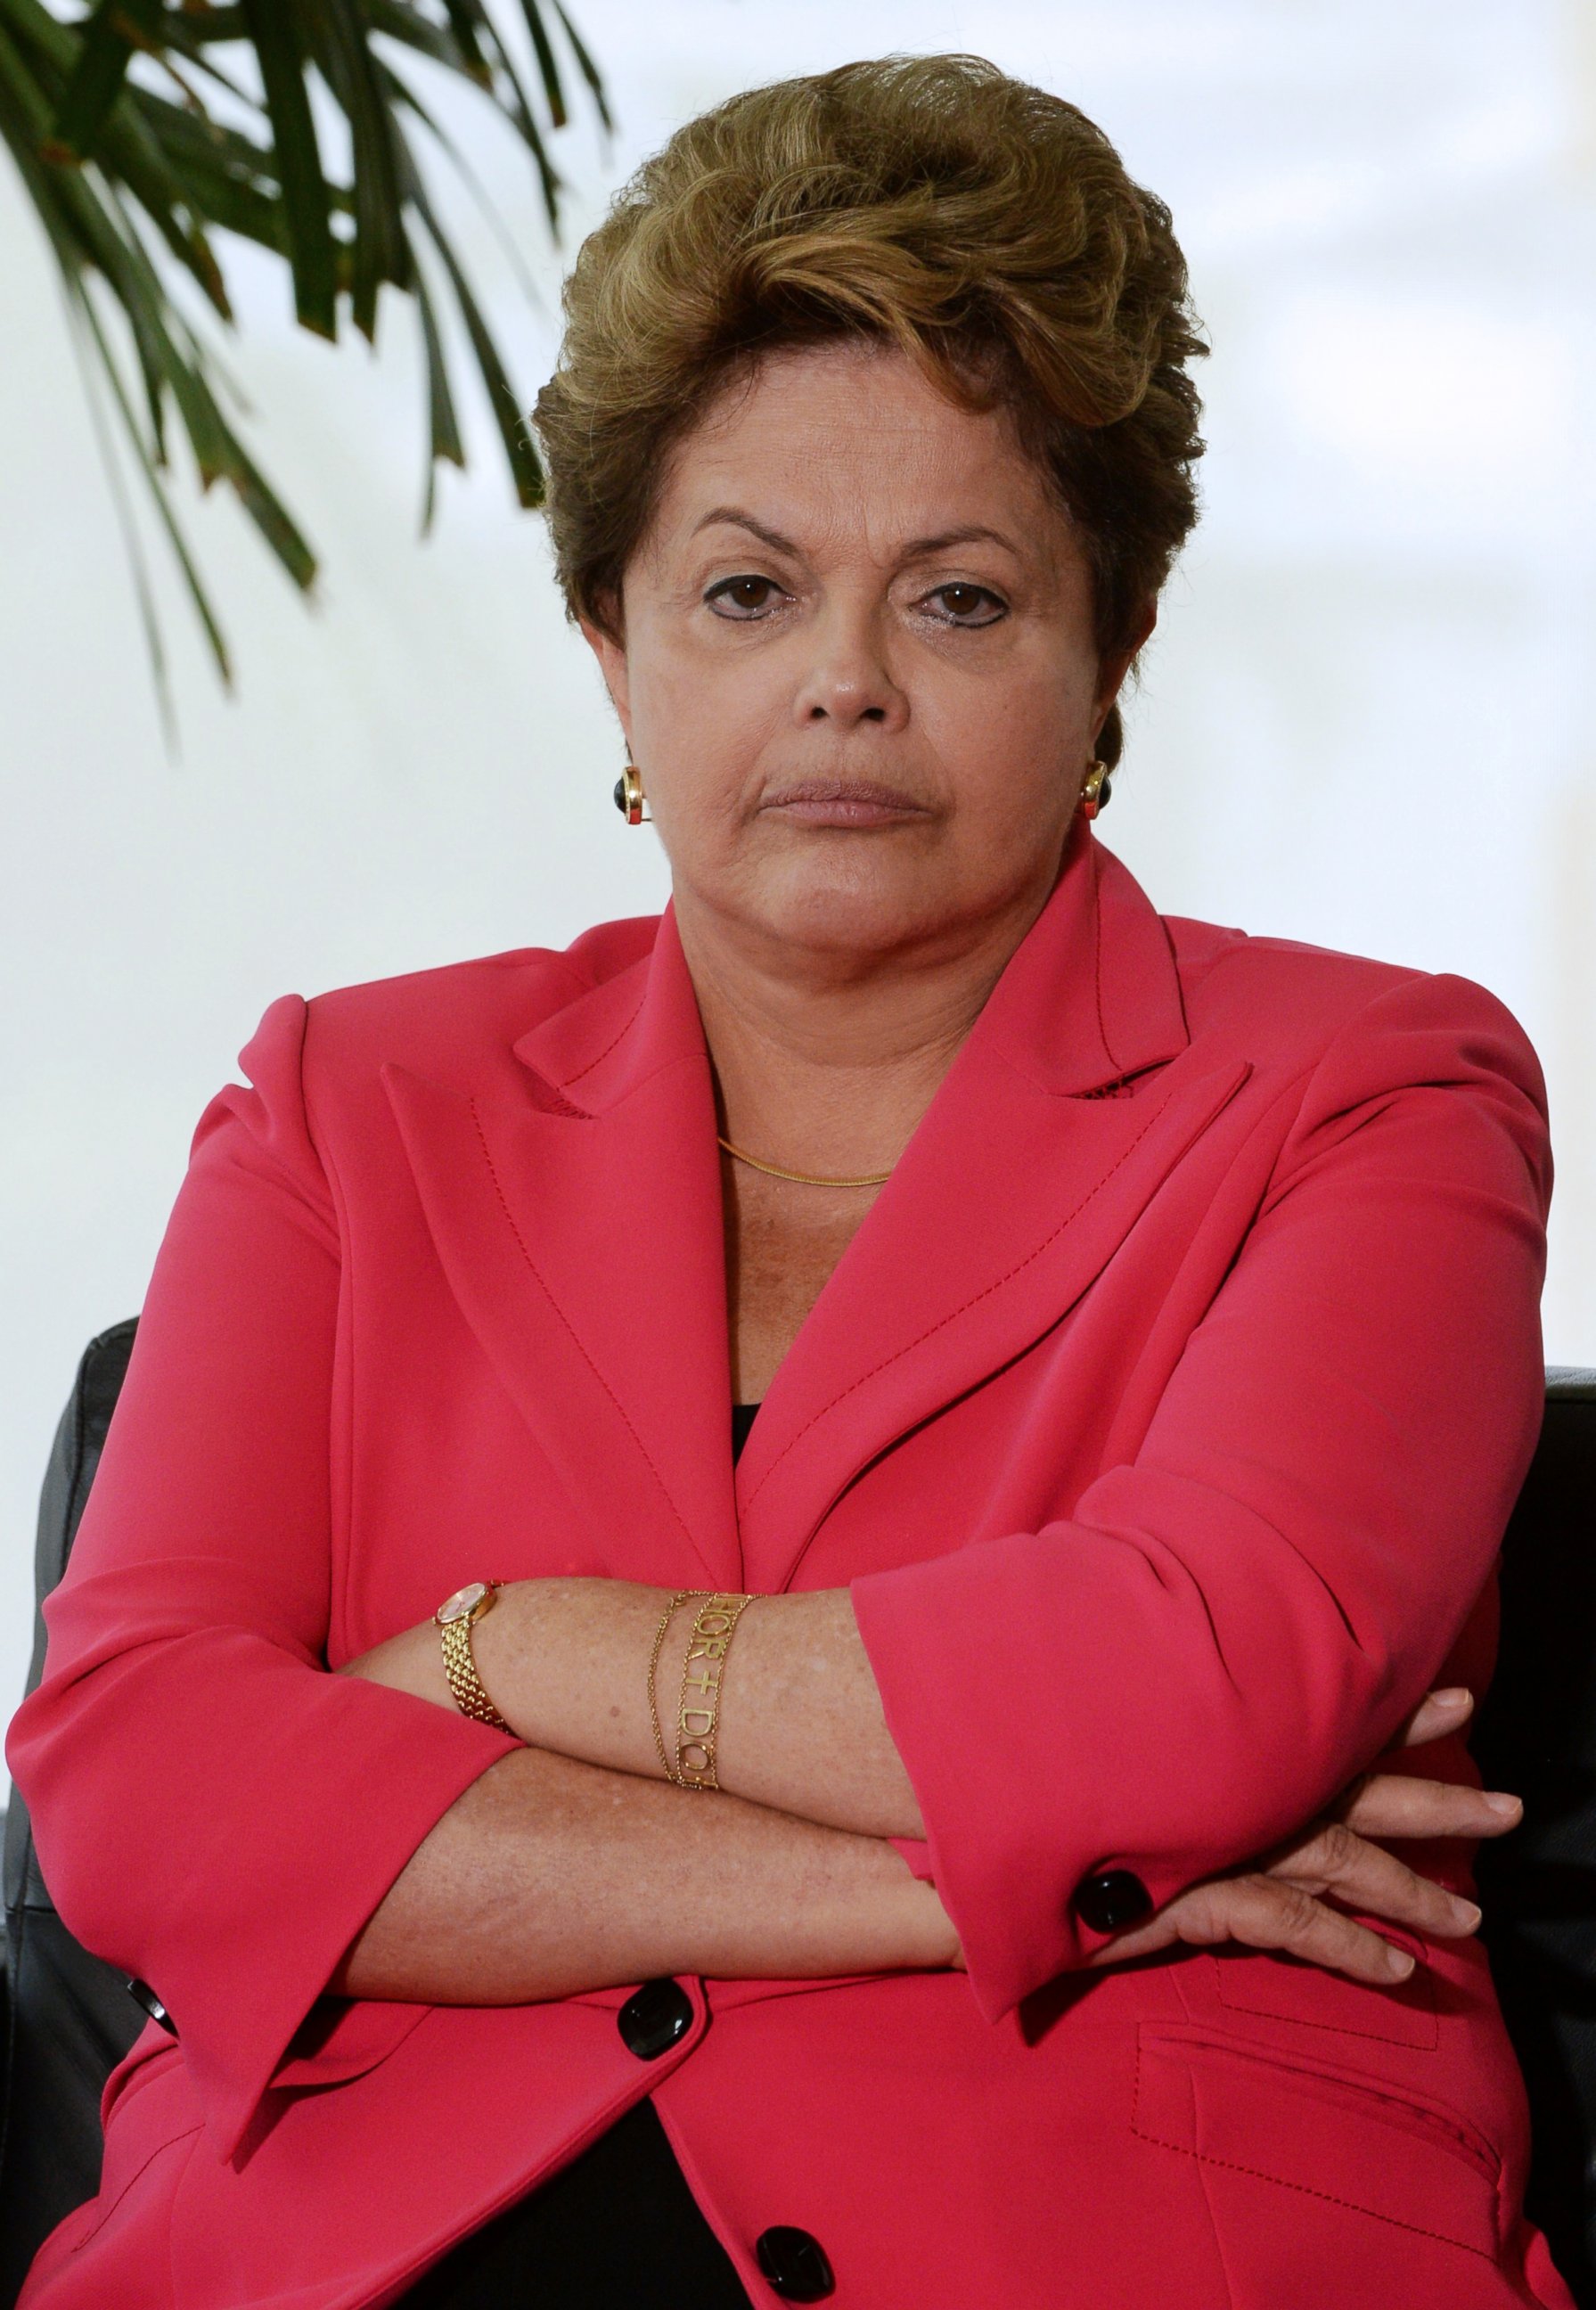 PHOTO: Brazilian President Dilma Rousseff listens to questions during a meeting at her office at the Planalto Palace in Brasilia, Brazil, July 11, 2013.